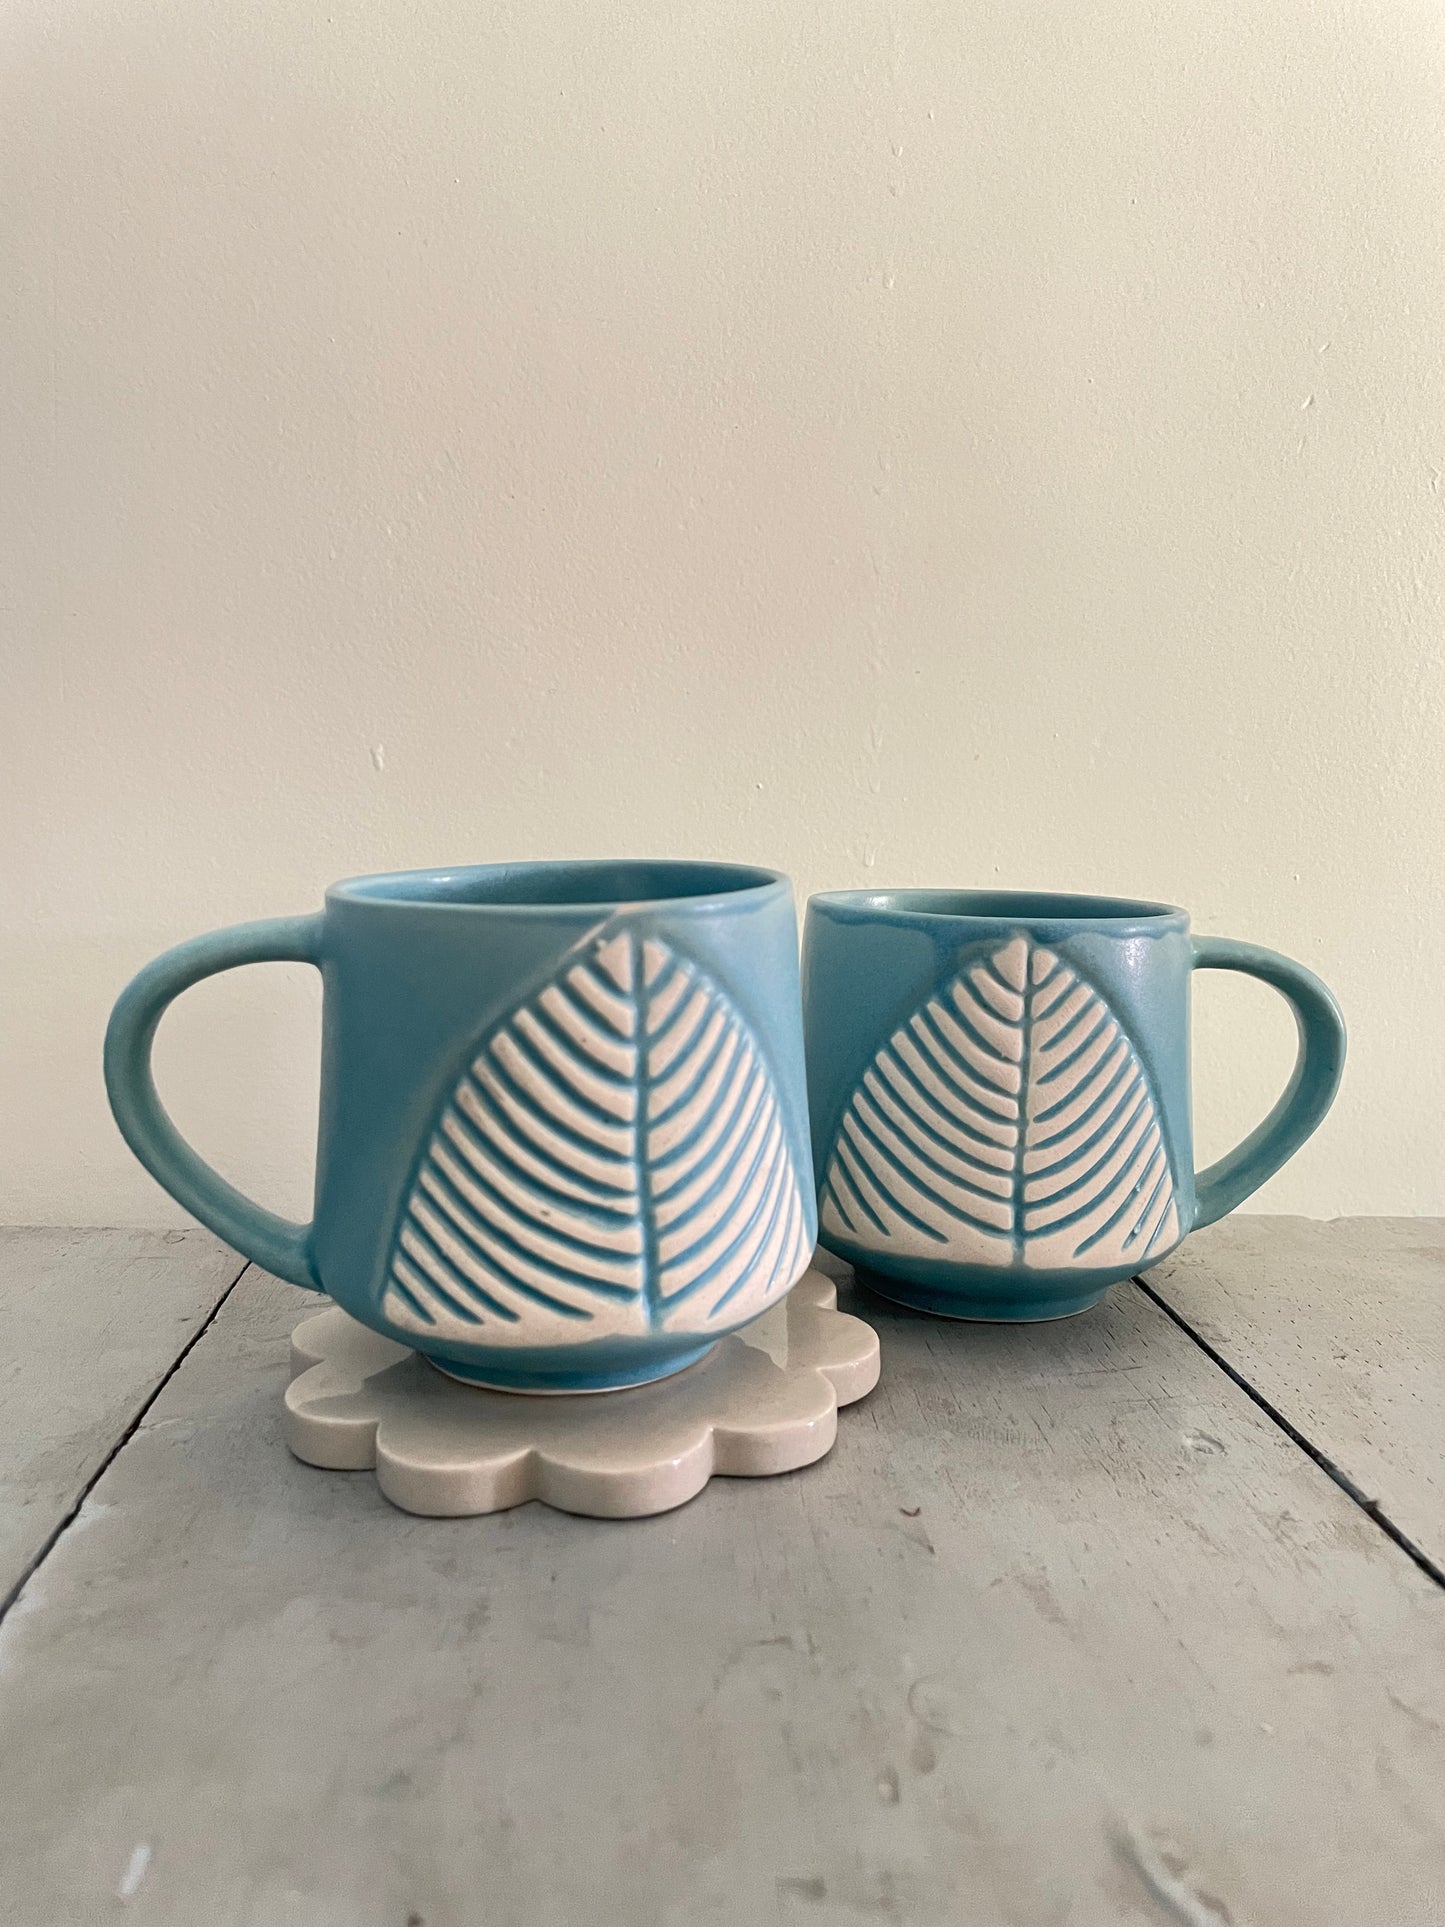 Pair of mini teal ceramic mug with big handle and off-white leaf motifs, one on a white ceramic flower coaster, other diagonally behind. Shop handcrafted ceramics in India